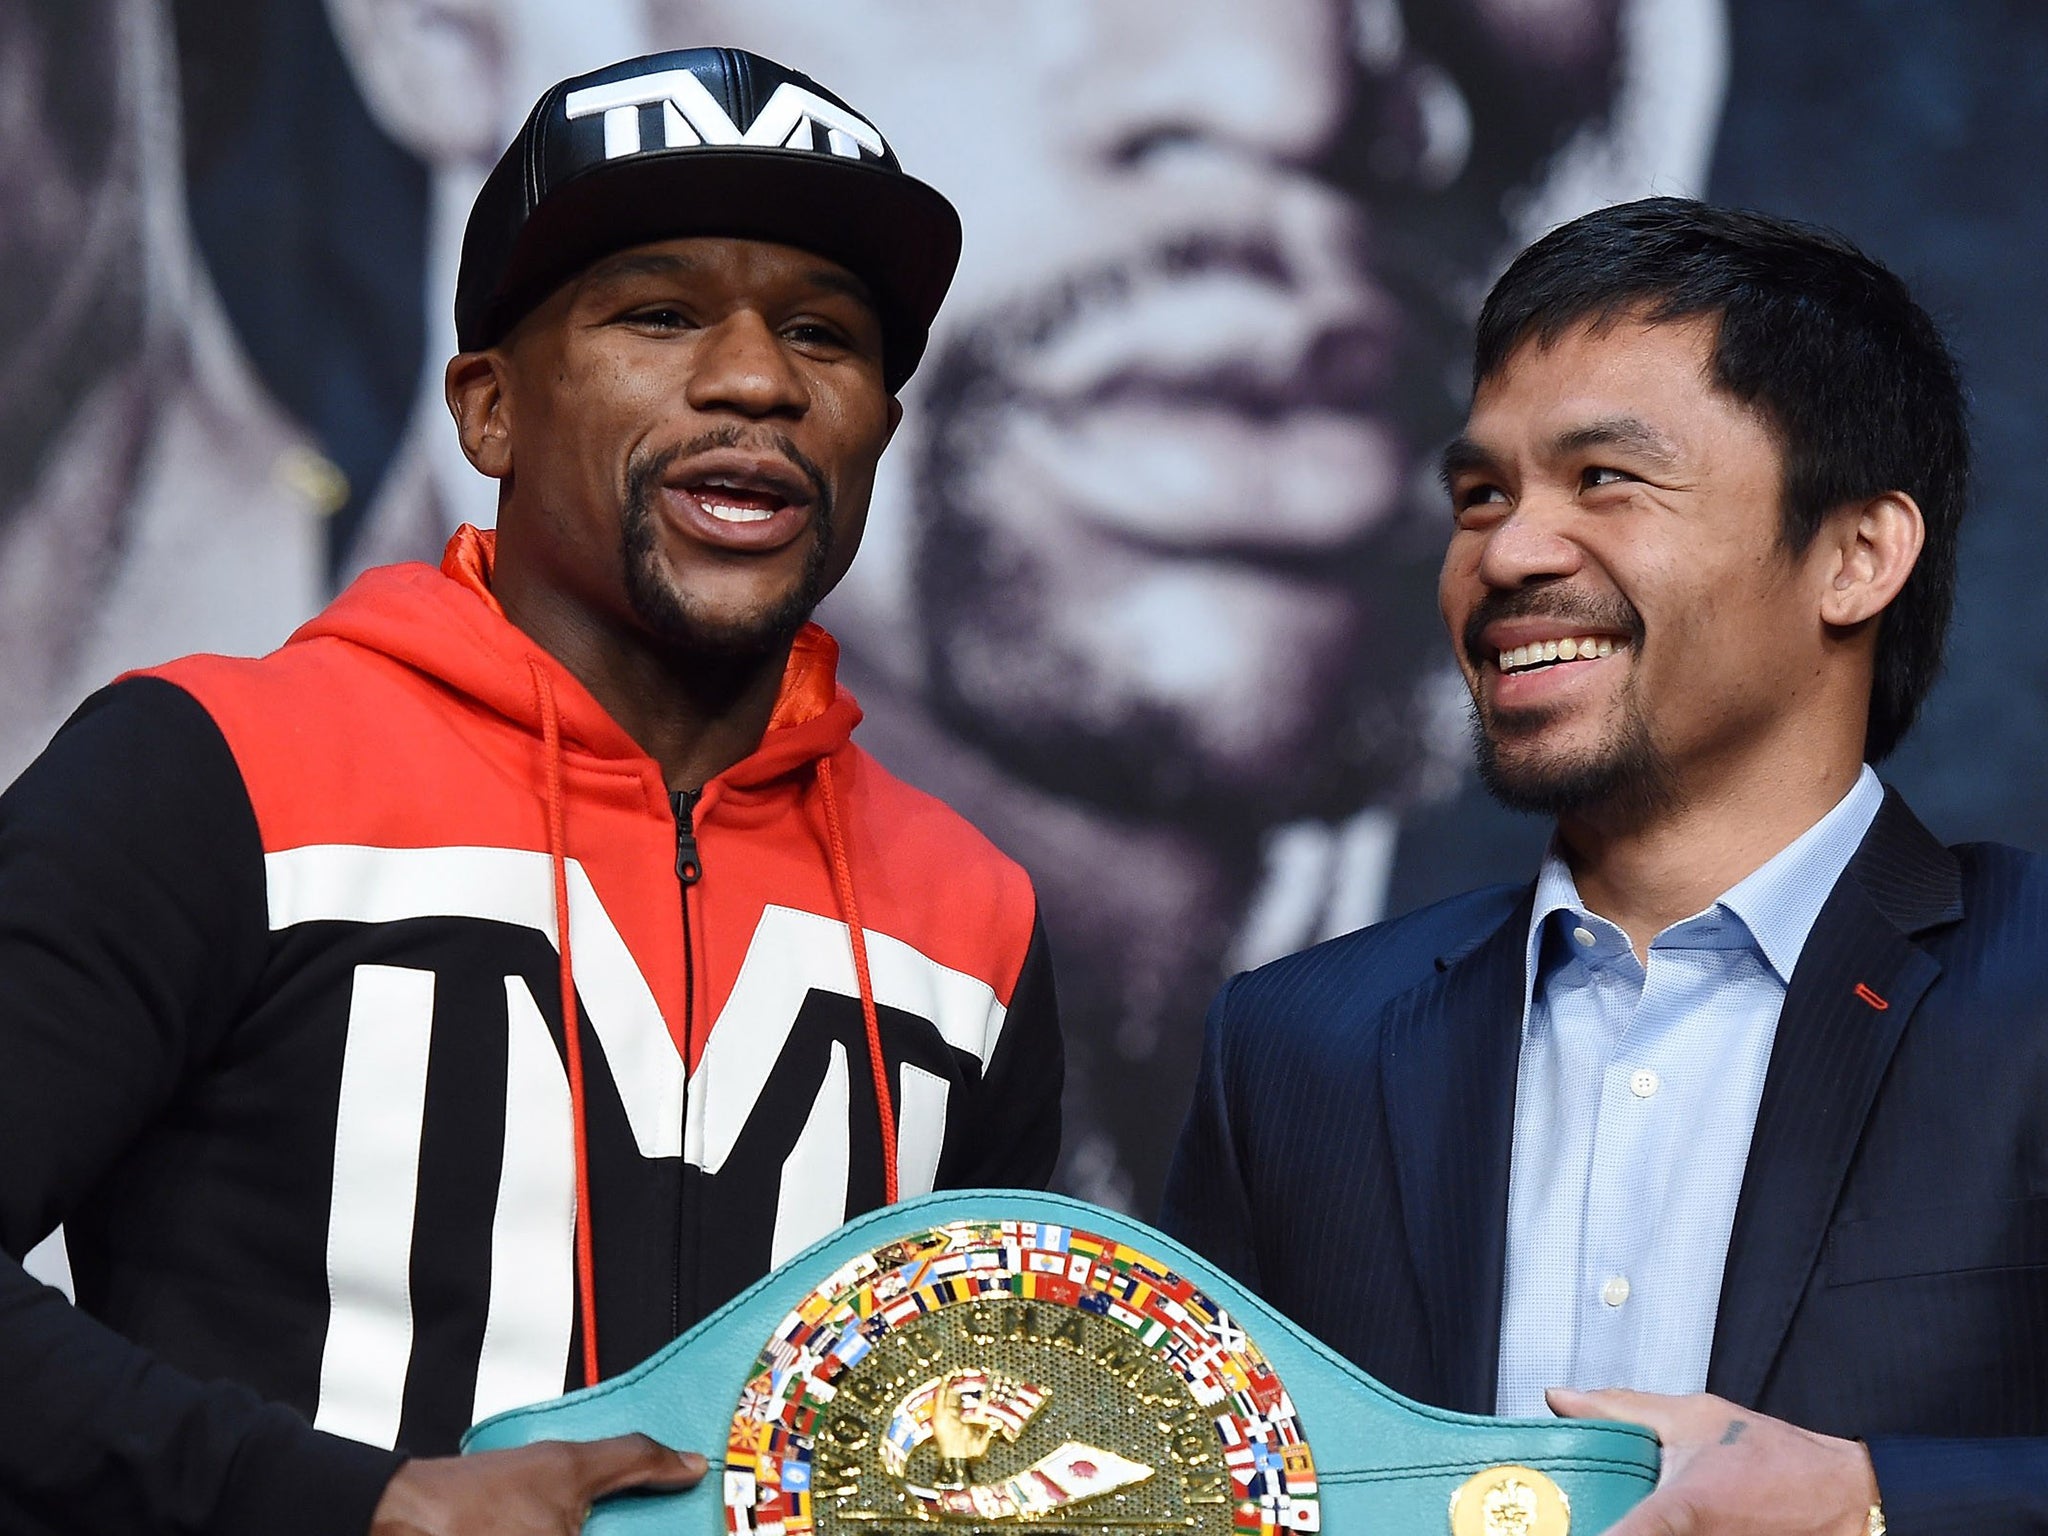 Floyd Mayweather Jr and Manny Pacquiao pose with a WBC championship belt